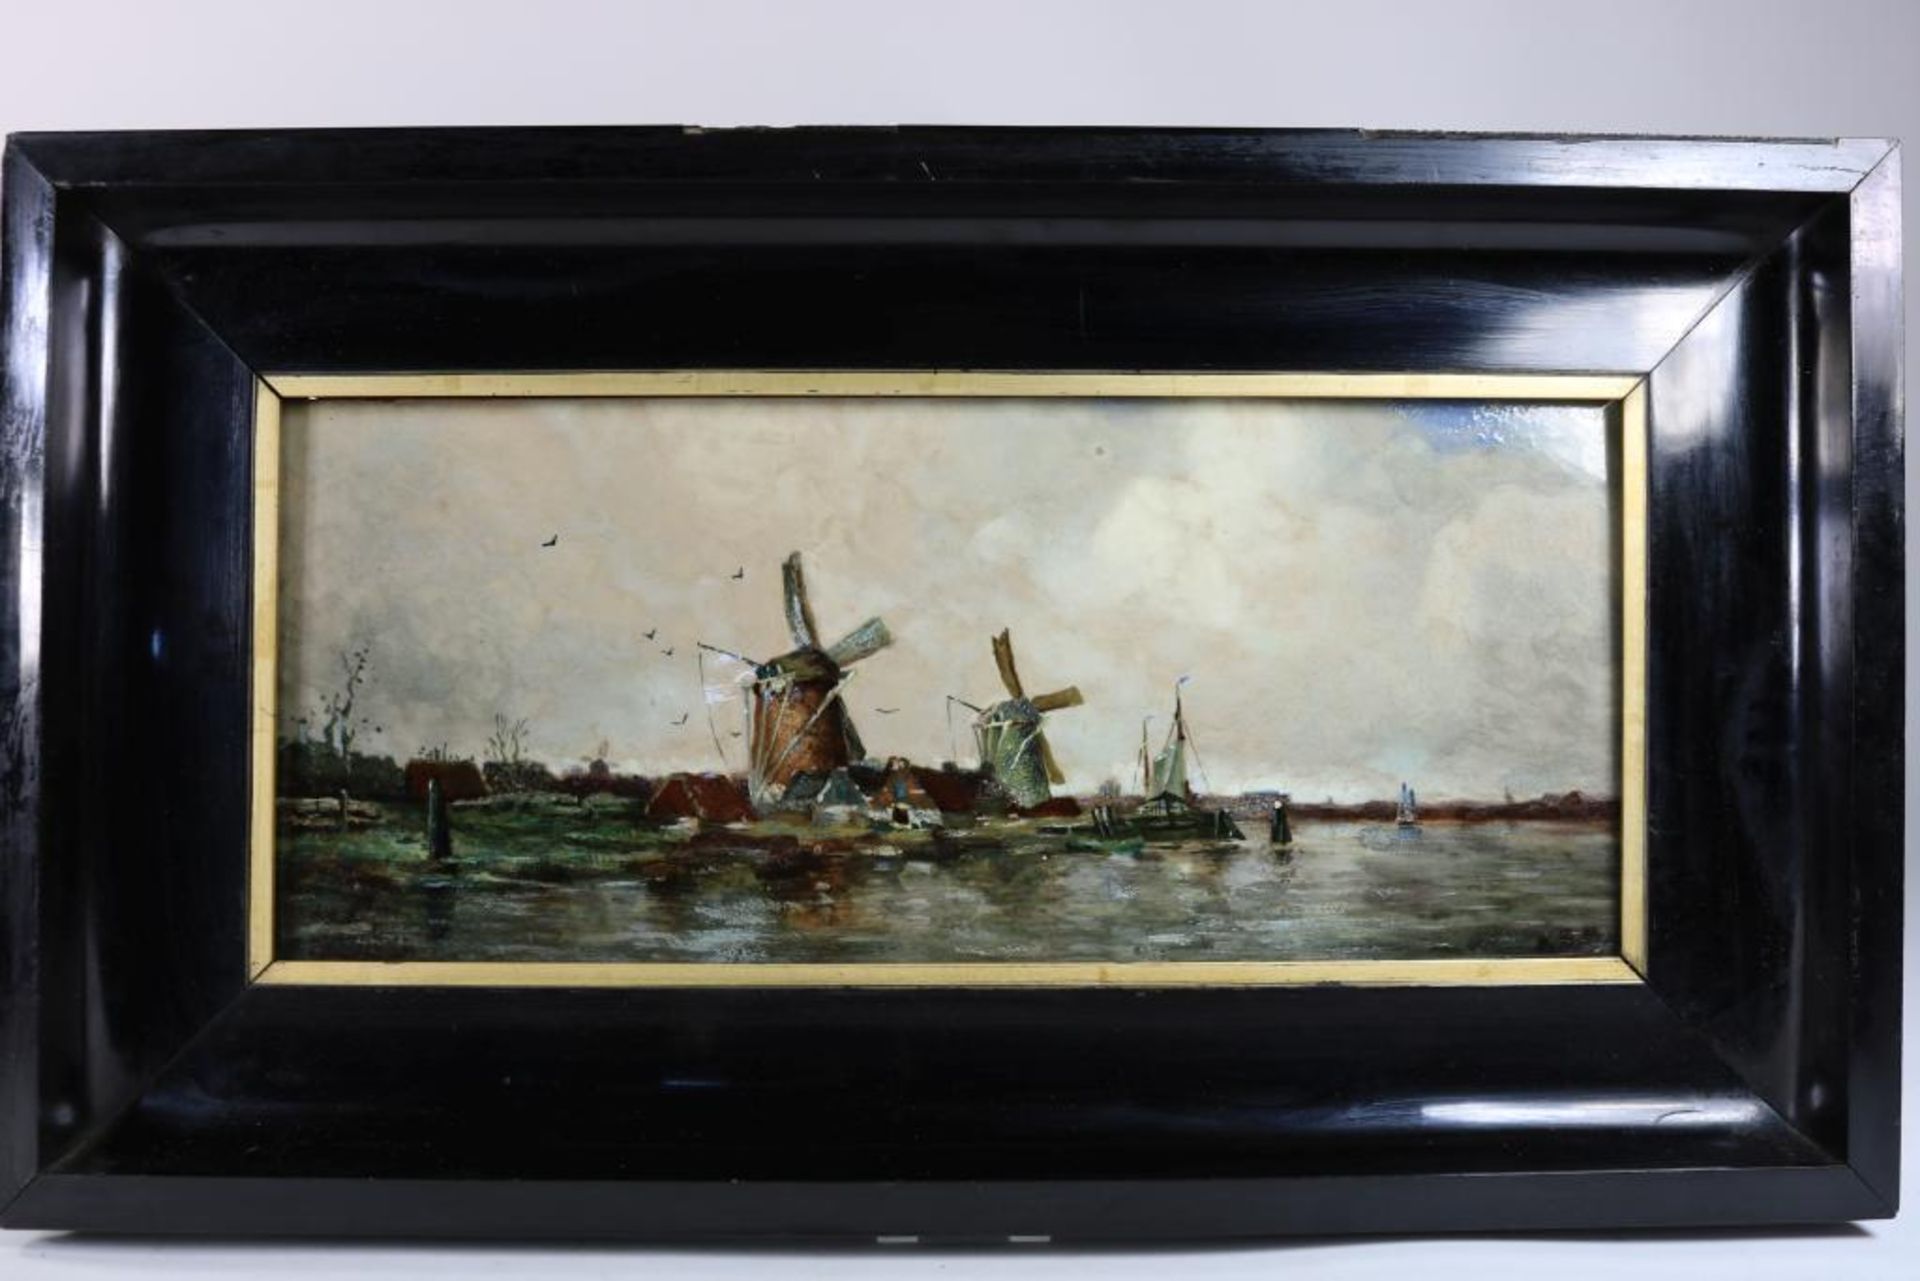 Polychrome handpainted plaquer, with windmales, marked: Rozenburg The Hague, 1904, 20 x 47 cm.